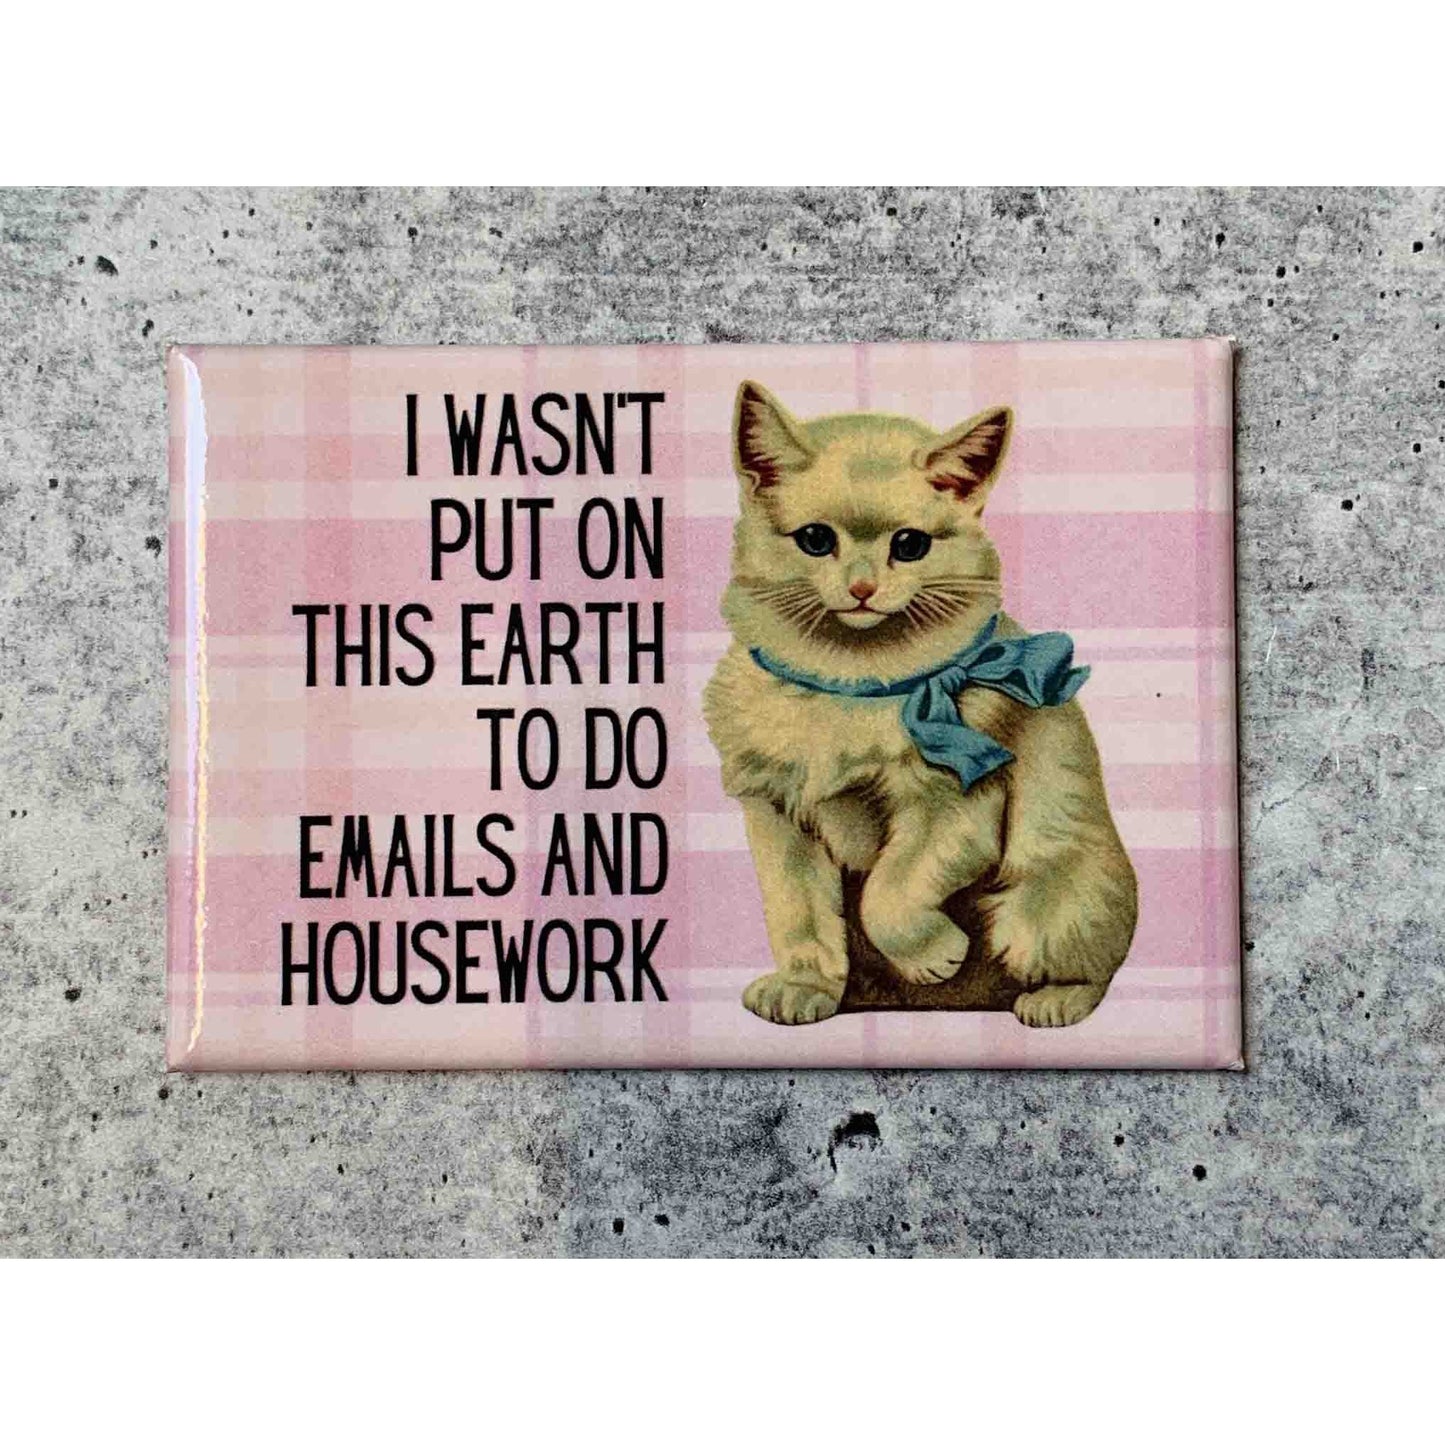 I Wasn't Put On This Earth To Do Emails And Housework Kitten Refrigerator Magnet